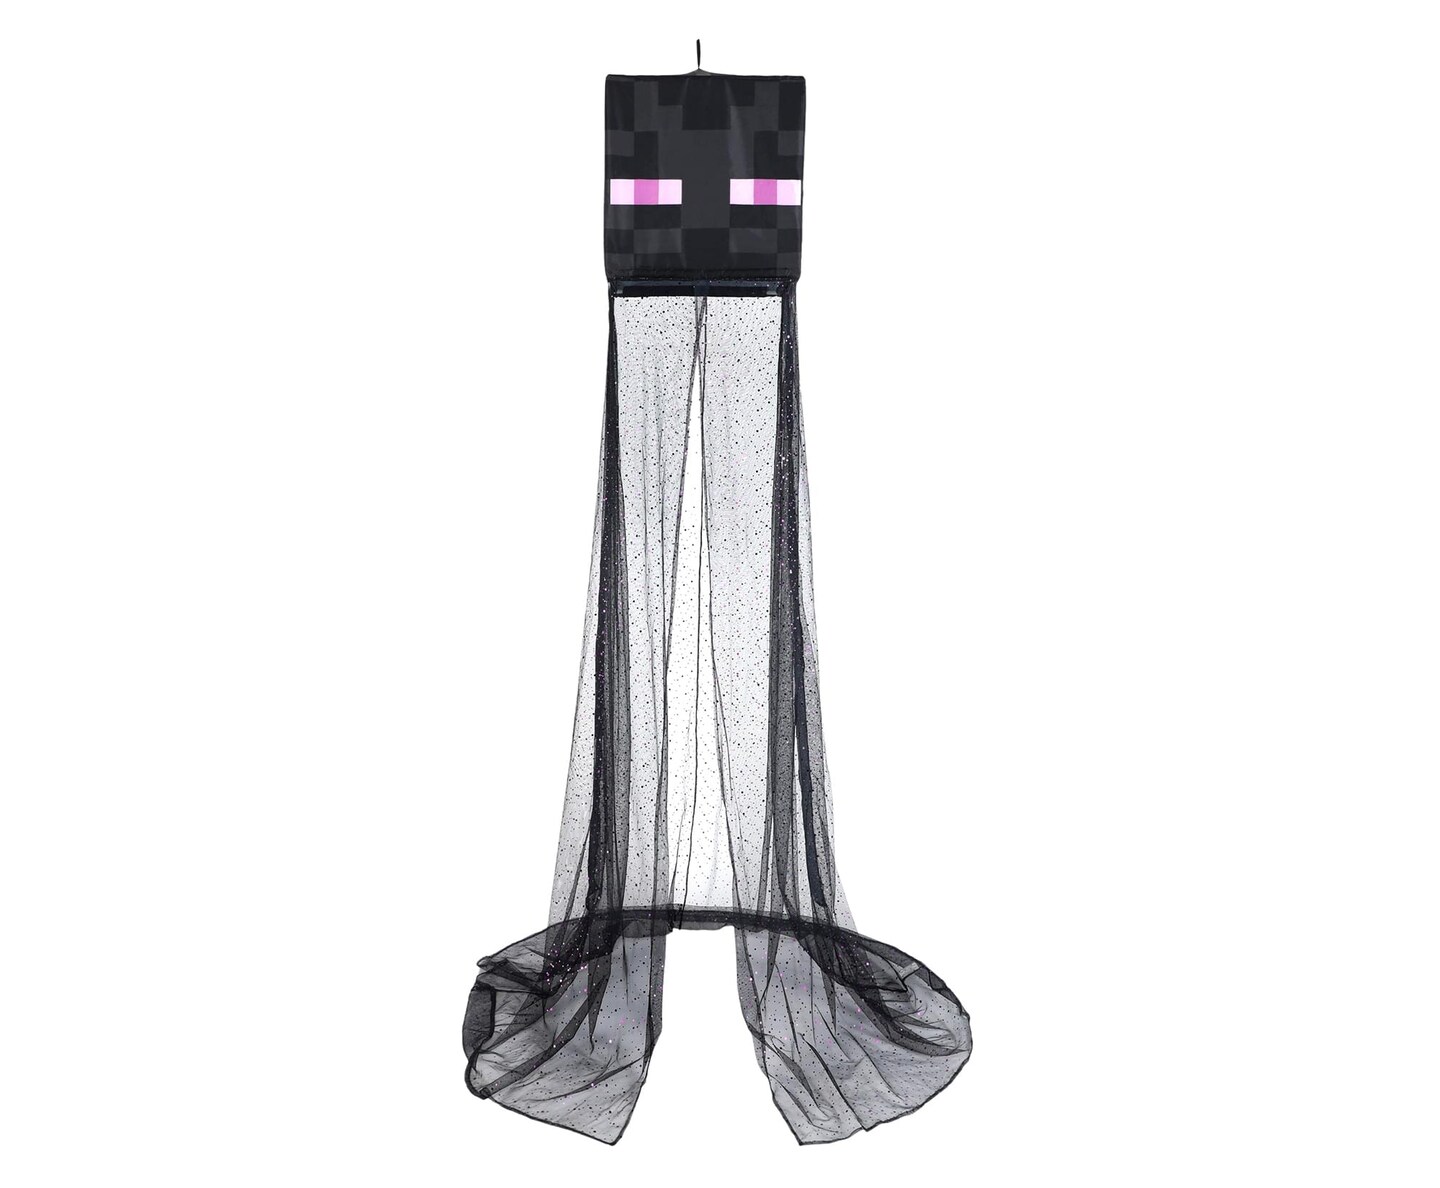 Minecraft Enderman Kids Bed Canopy for Ceiling, Hanging Curtain Netting